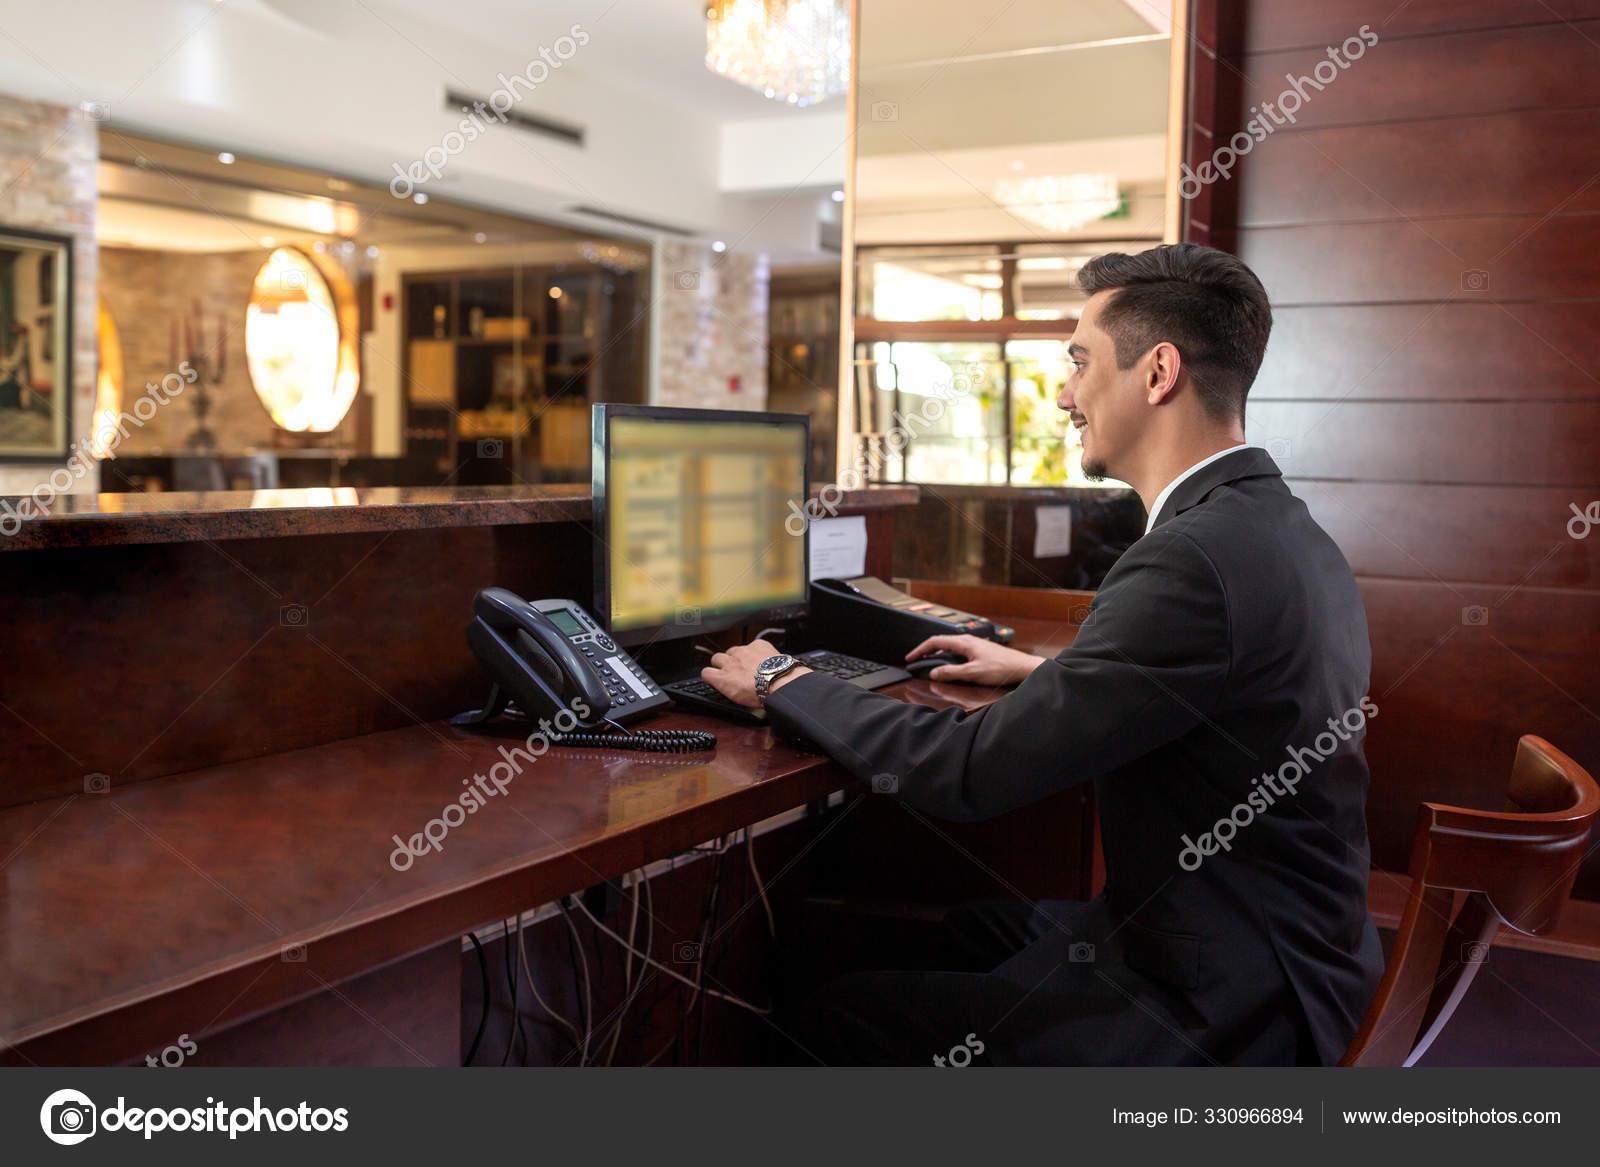 Front Desk Hotel Receptionist Working Stock Photo C Didesign